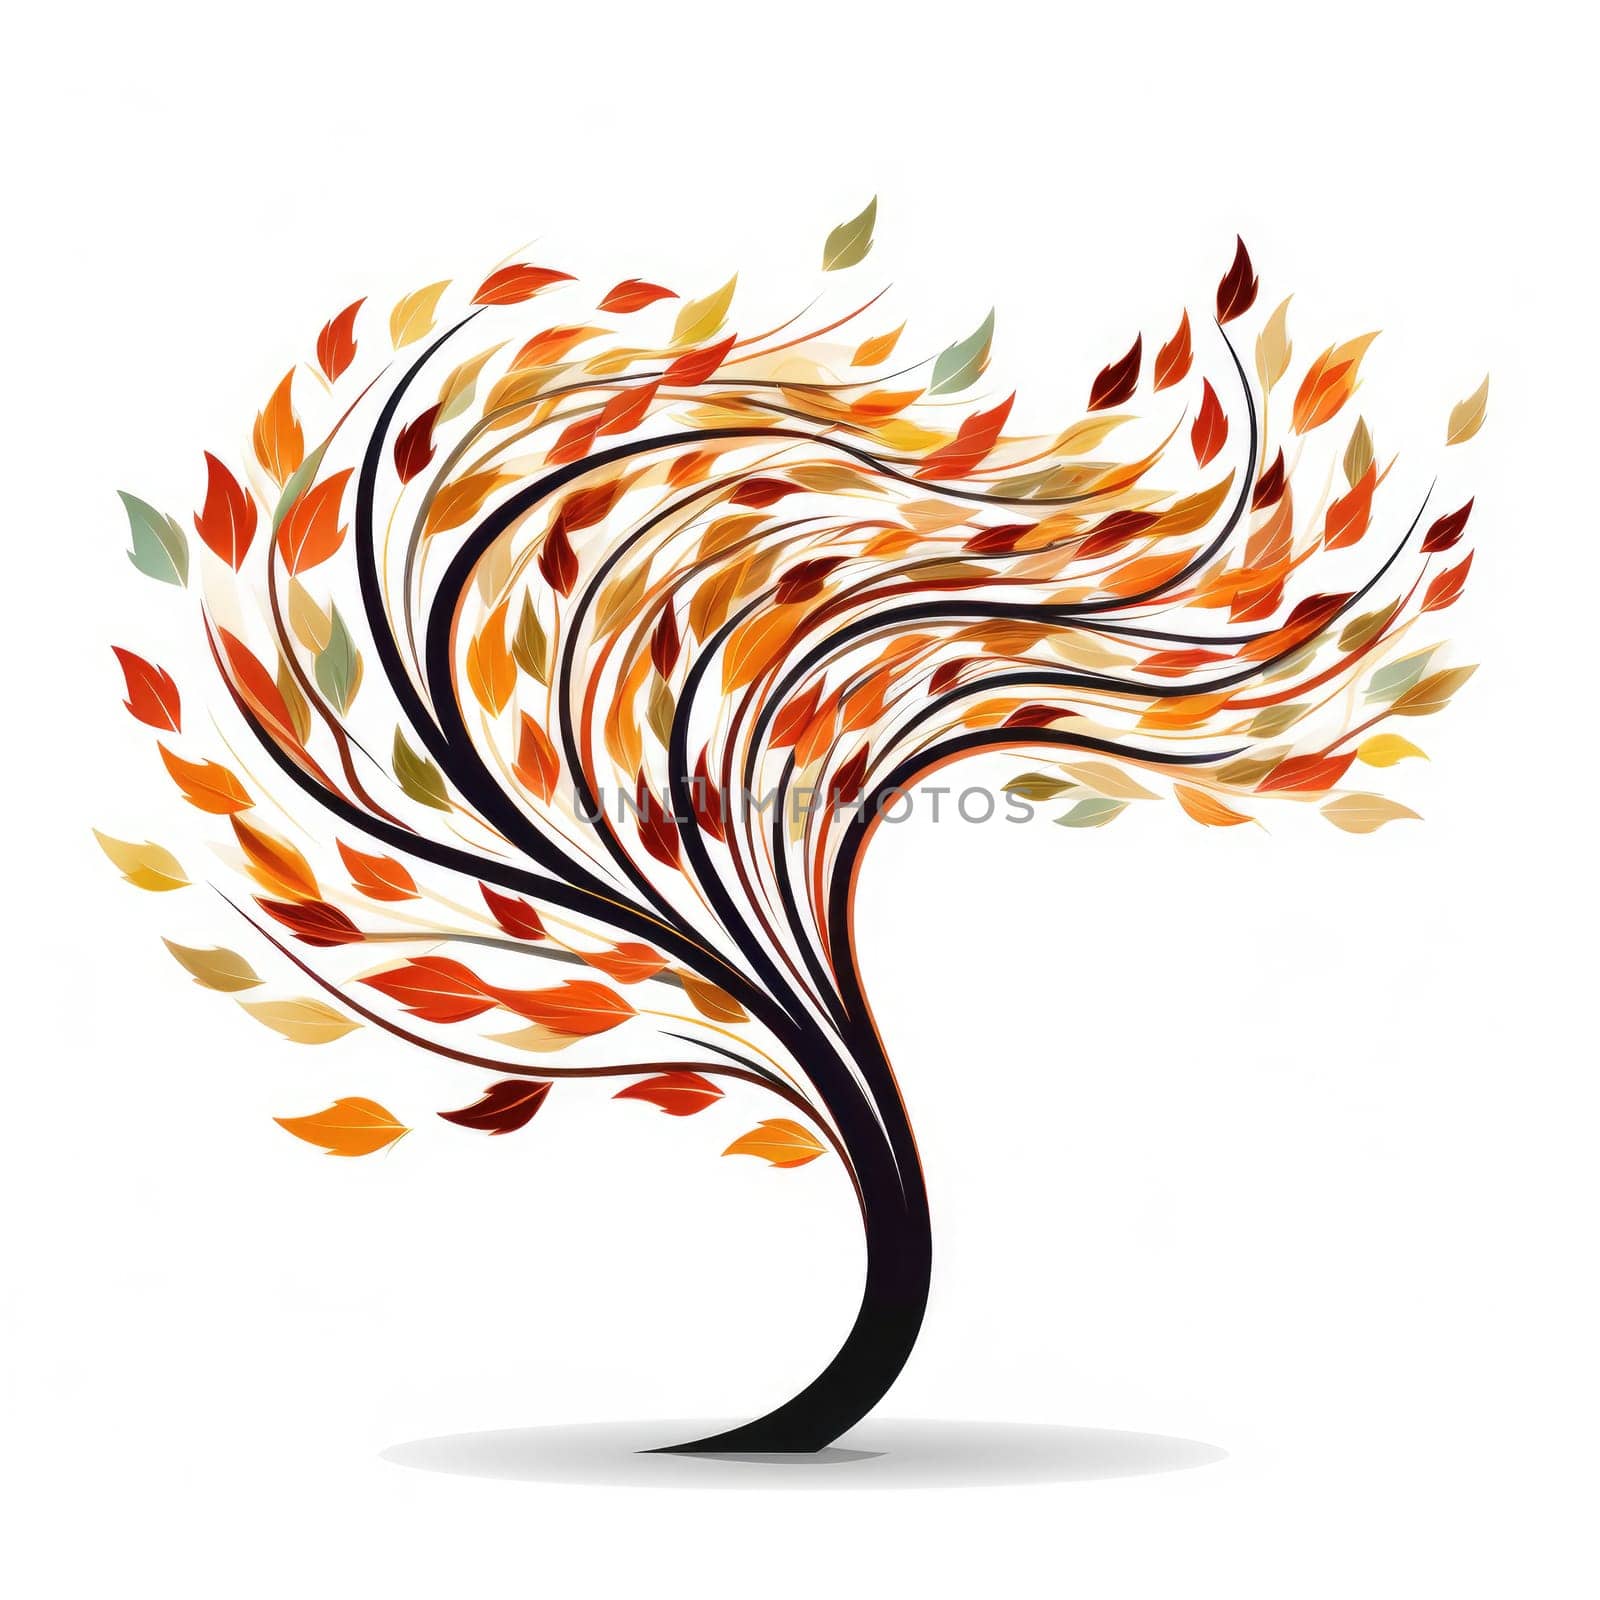 Autumn tree in the wind in minimalistic decorative art style isolated on white background. Ecology logo style